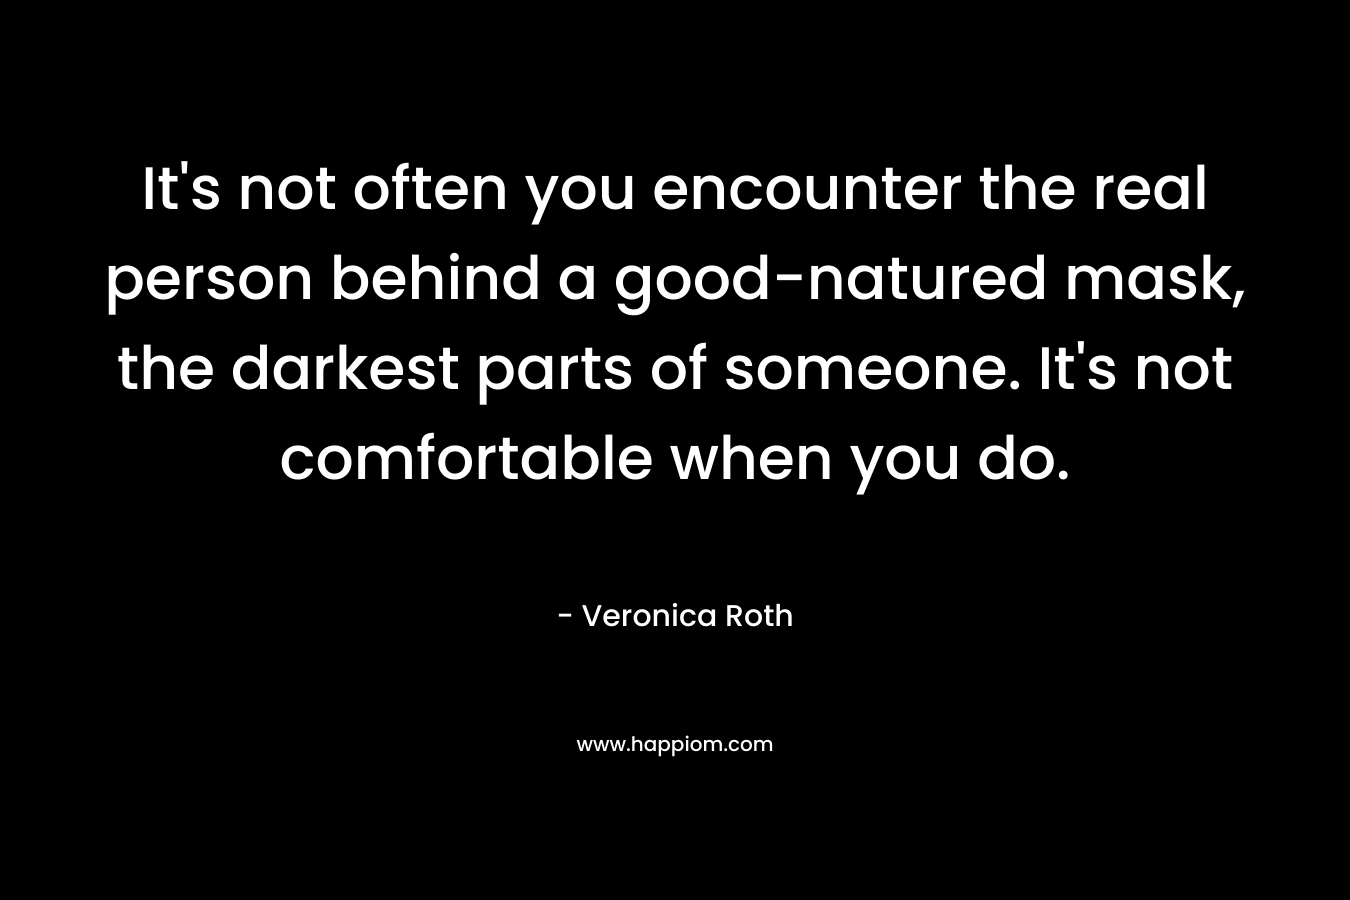 It’s not often you encounter the real person behind a good-natured mask, the darkest parts of someone. It’s not comfortable when you do. – Veronica Roth